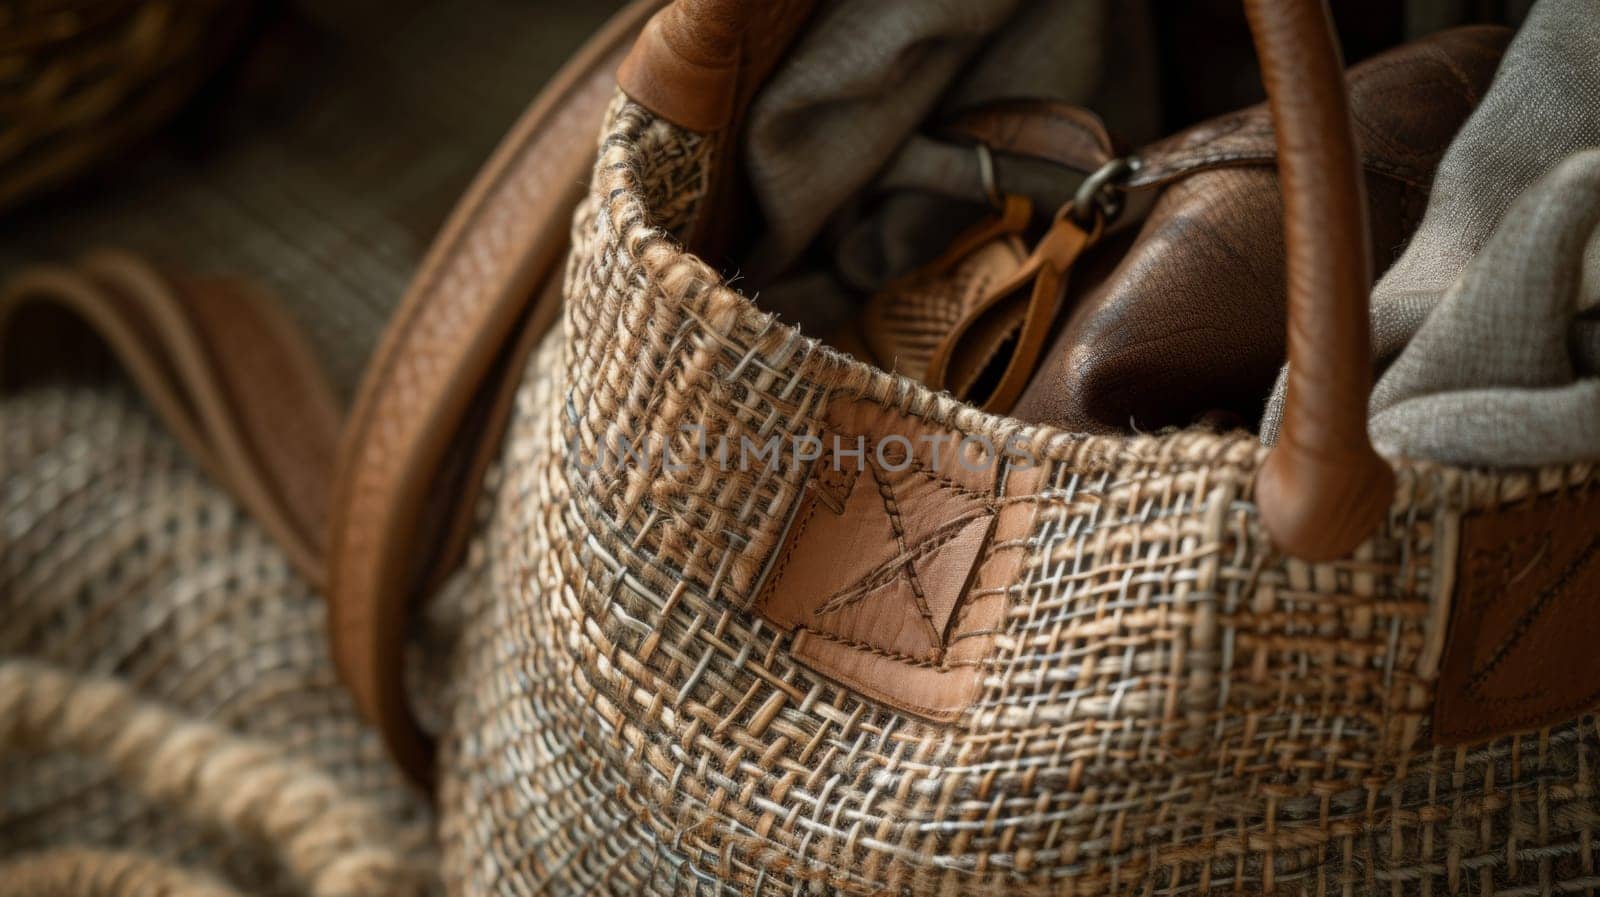 A close up of a woven bag with some items inside